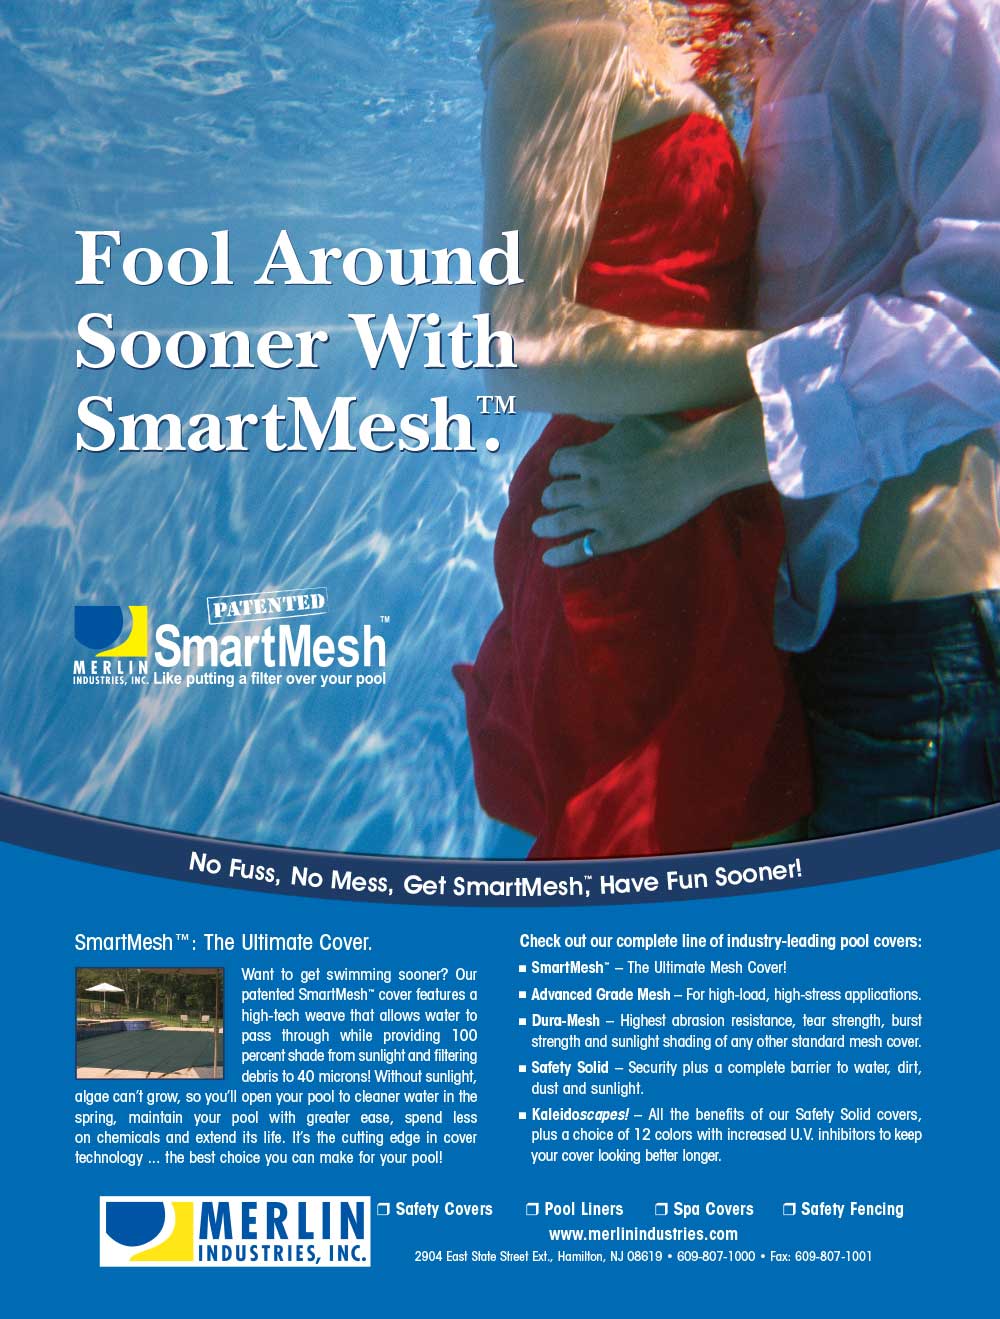 Designed by Russ at RgB Design Group Merlin Industries Smart Mesh Ad